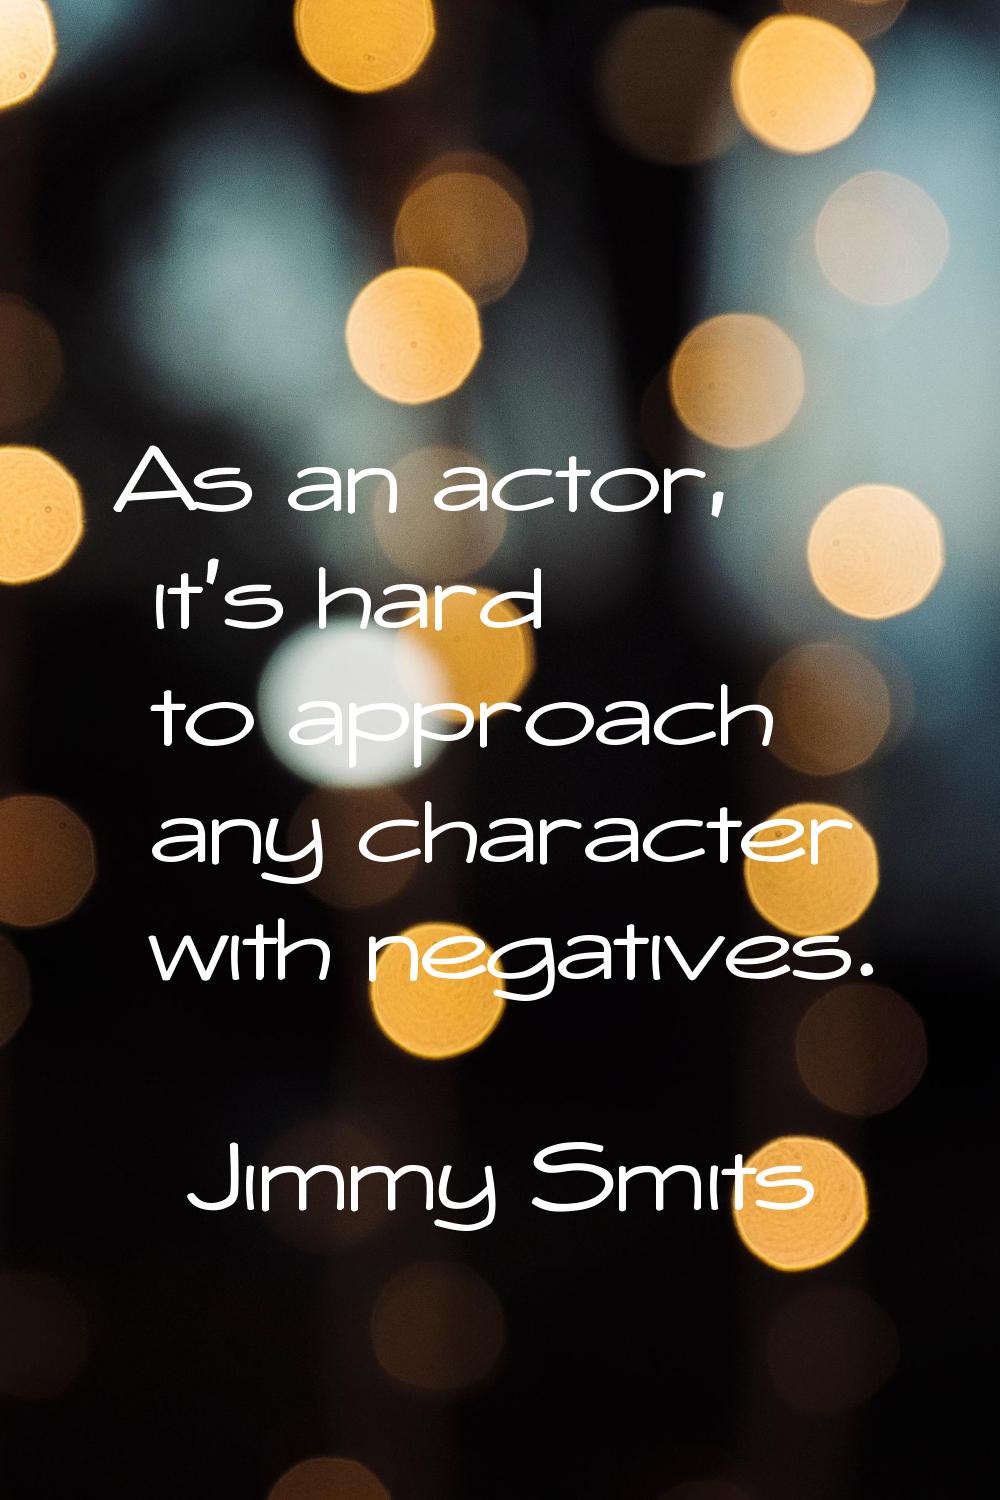 As an actor, it's hard to approach any character with negatives.